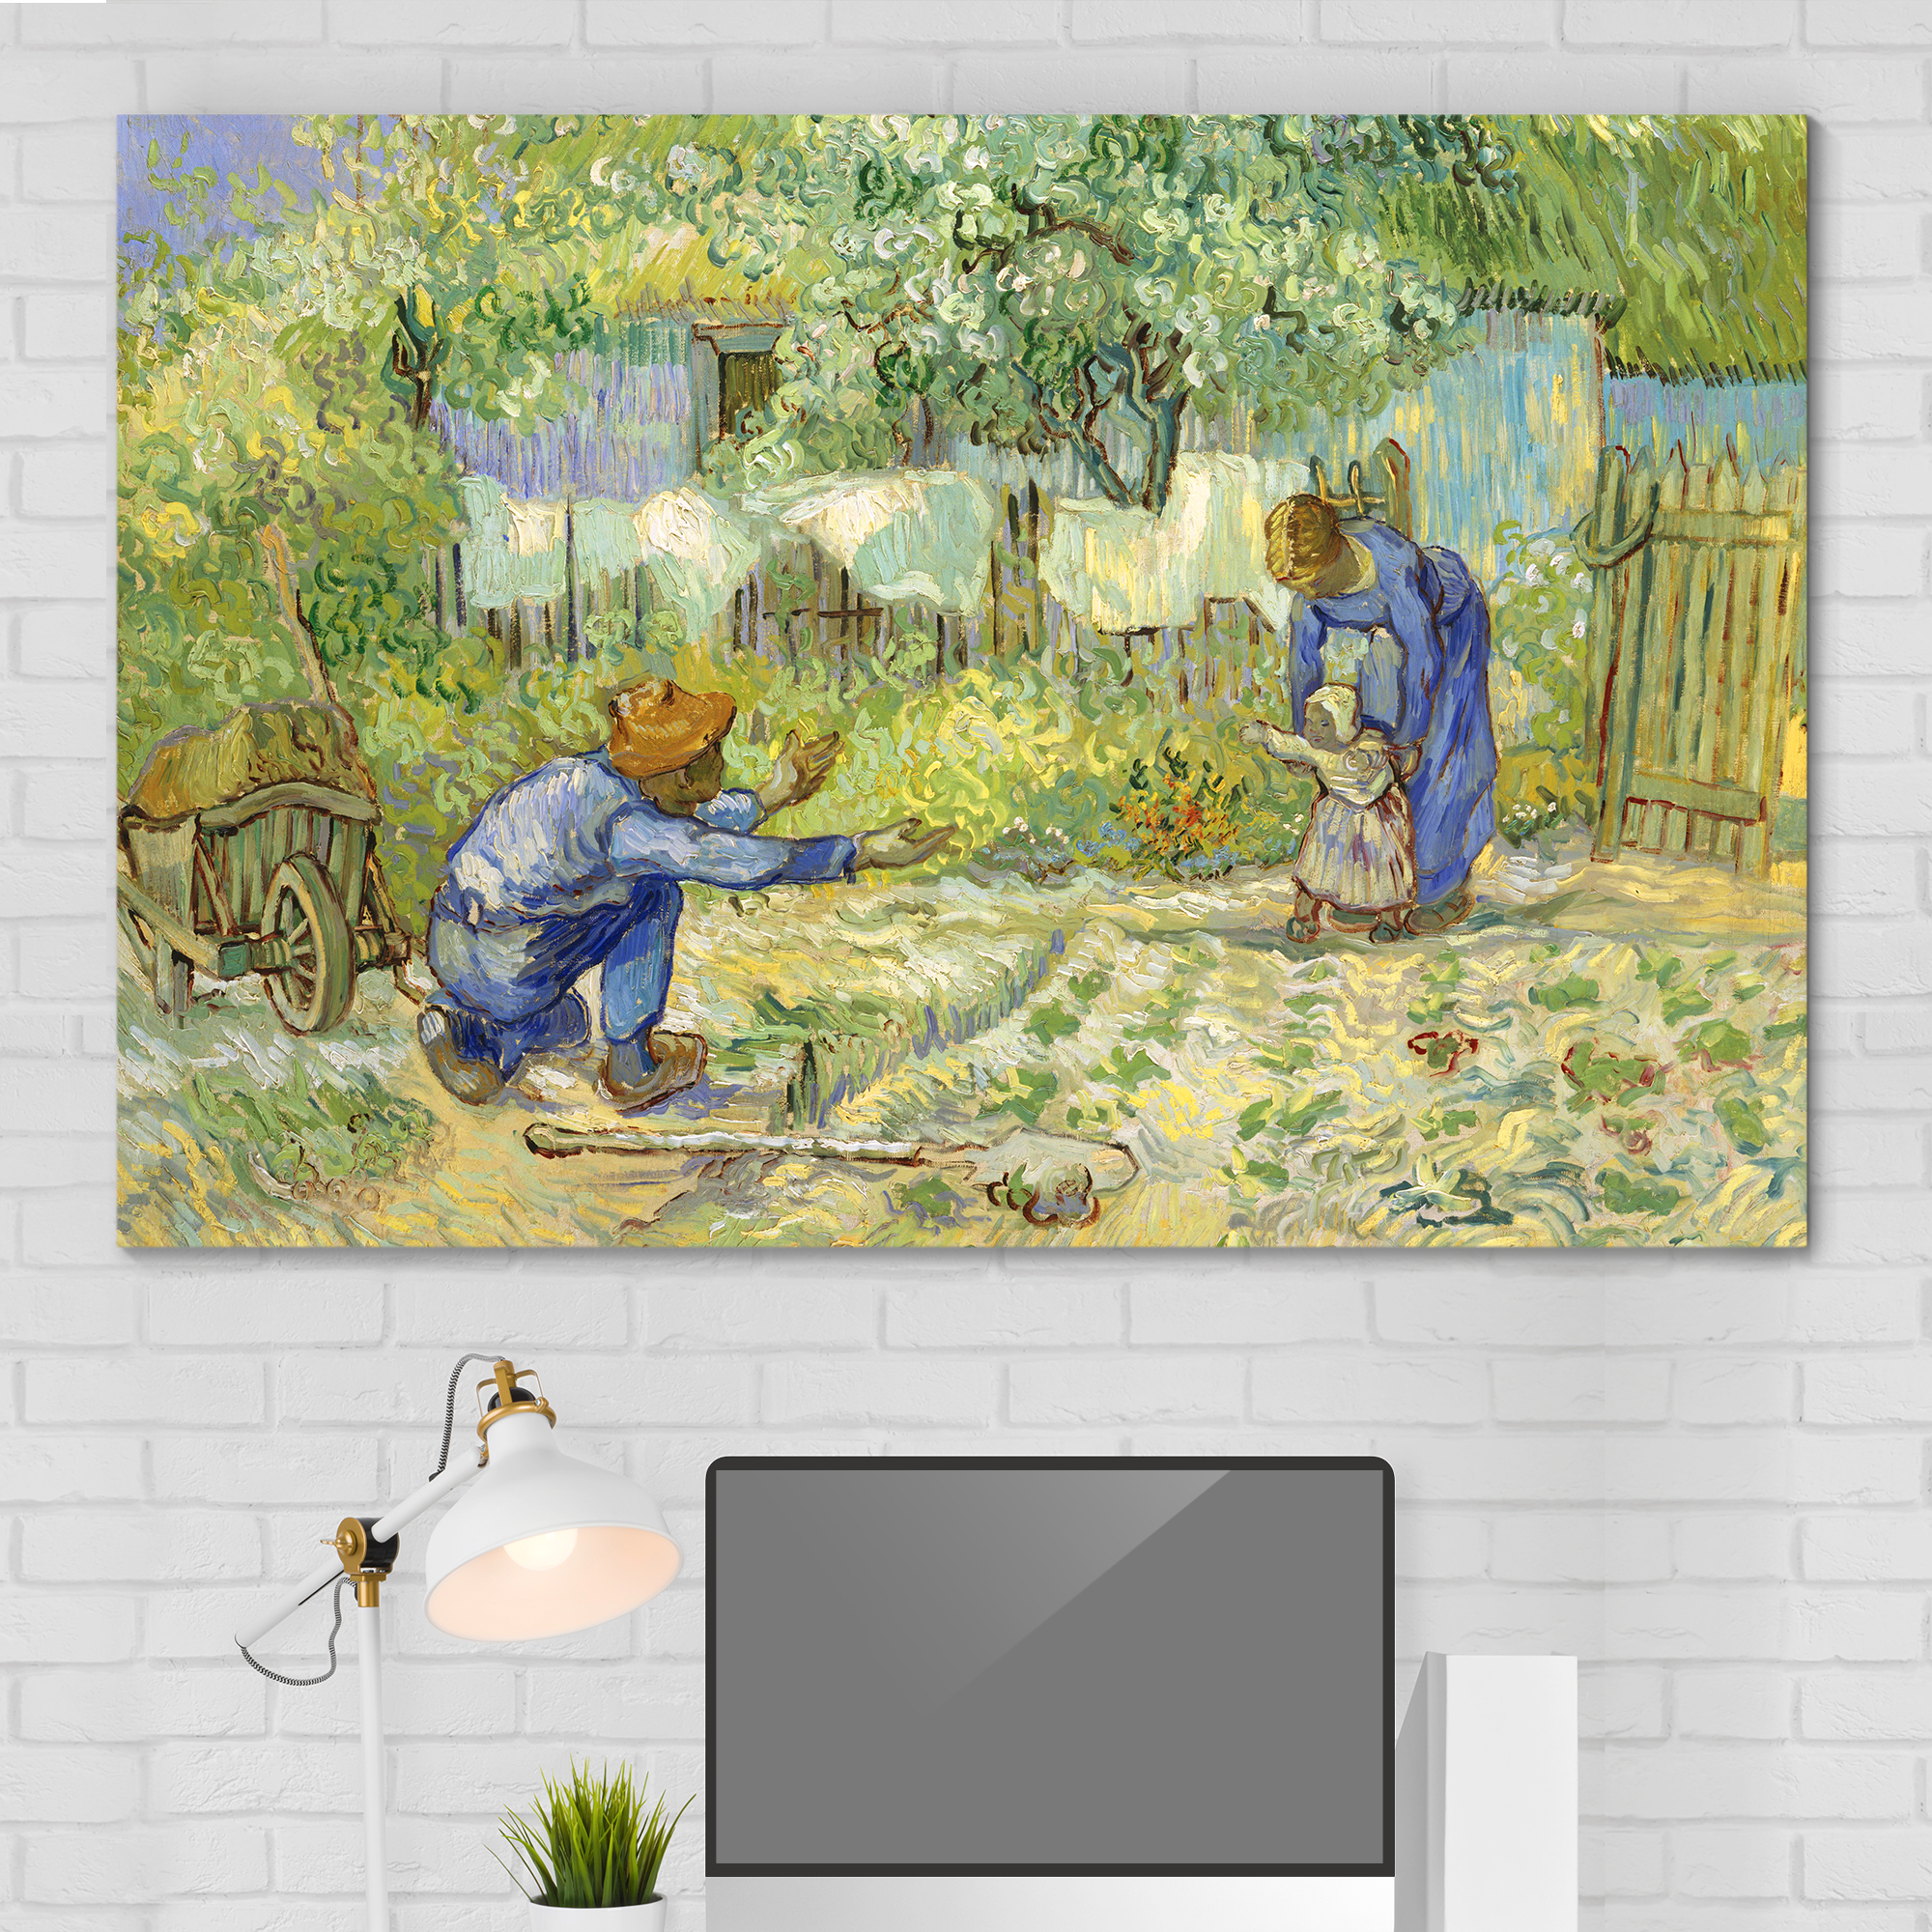 First Steps (After Millet) by Vincent Van Gogh - Oil Painting Reproduction on Canvas Prints Wall Art, Ready to Hang - 24